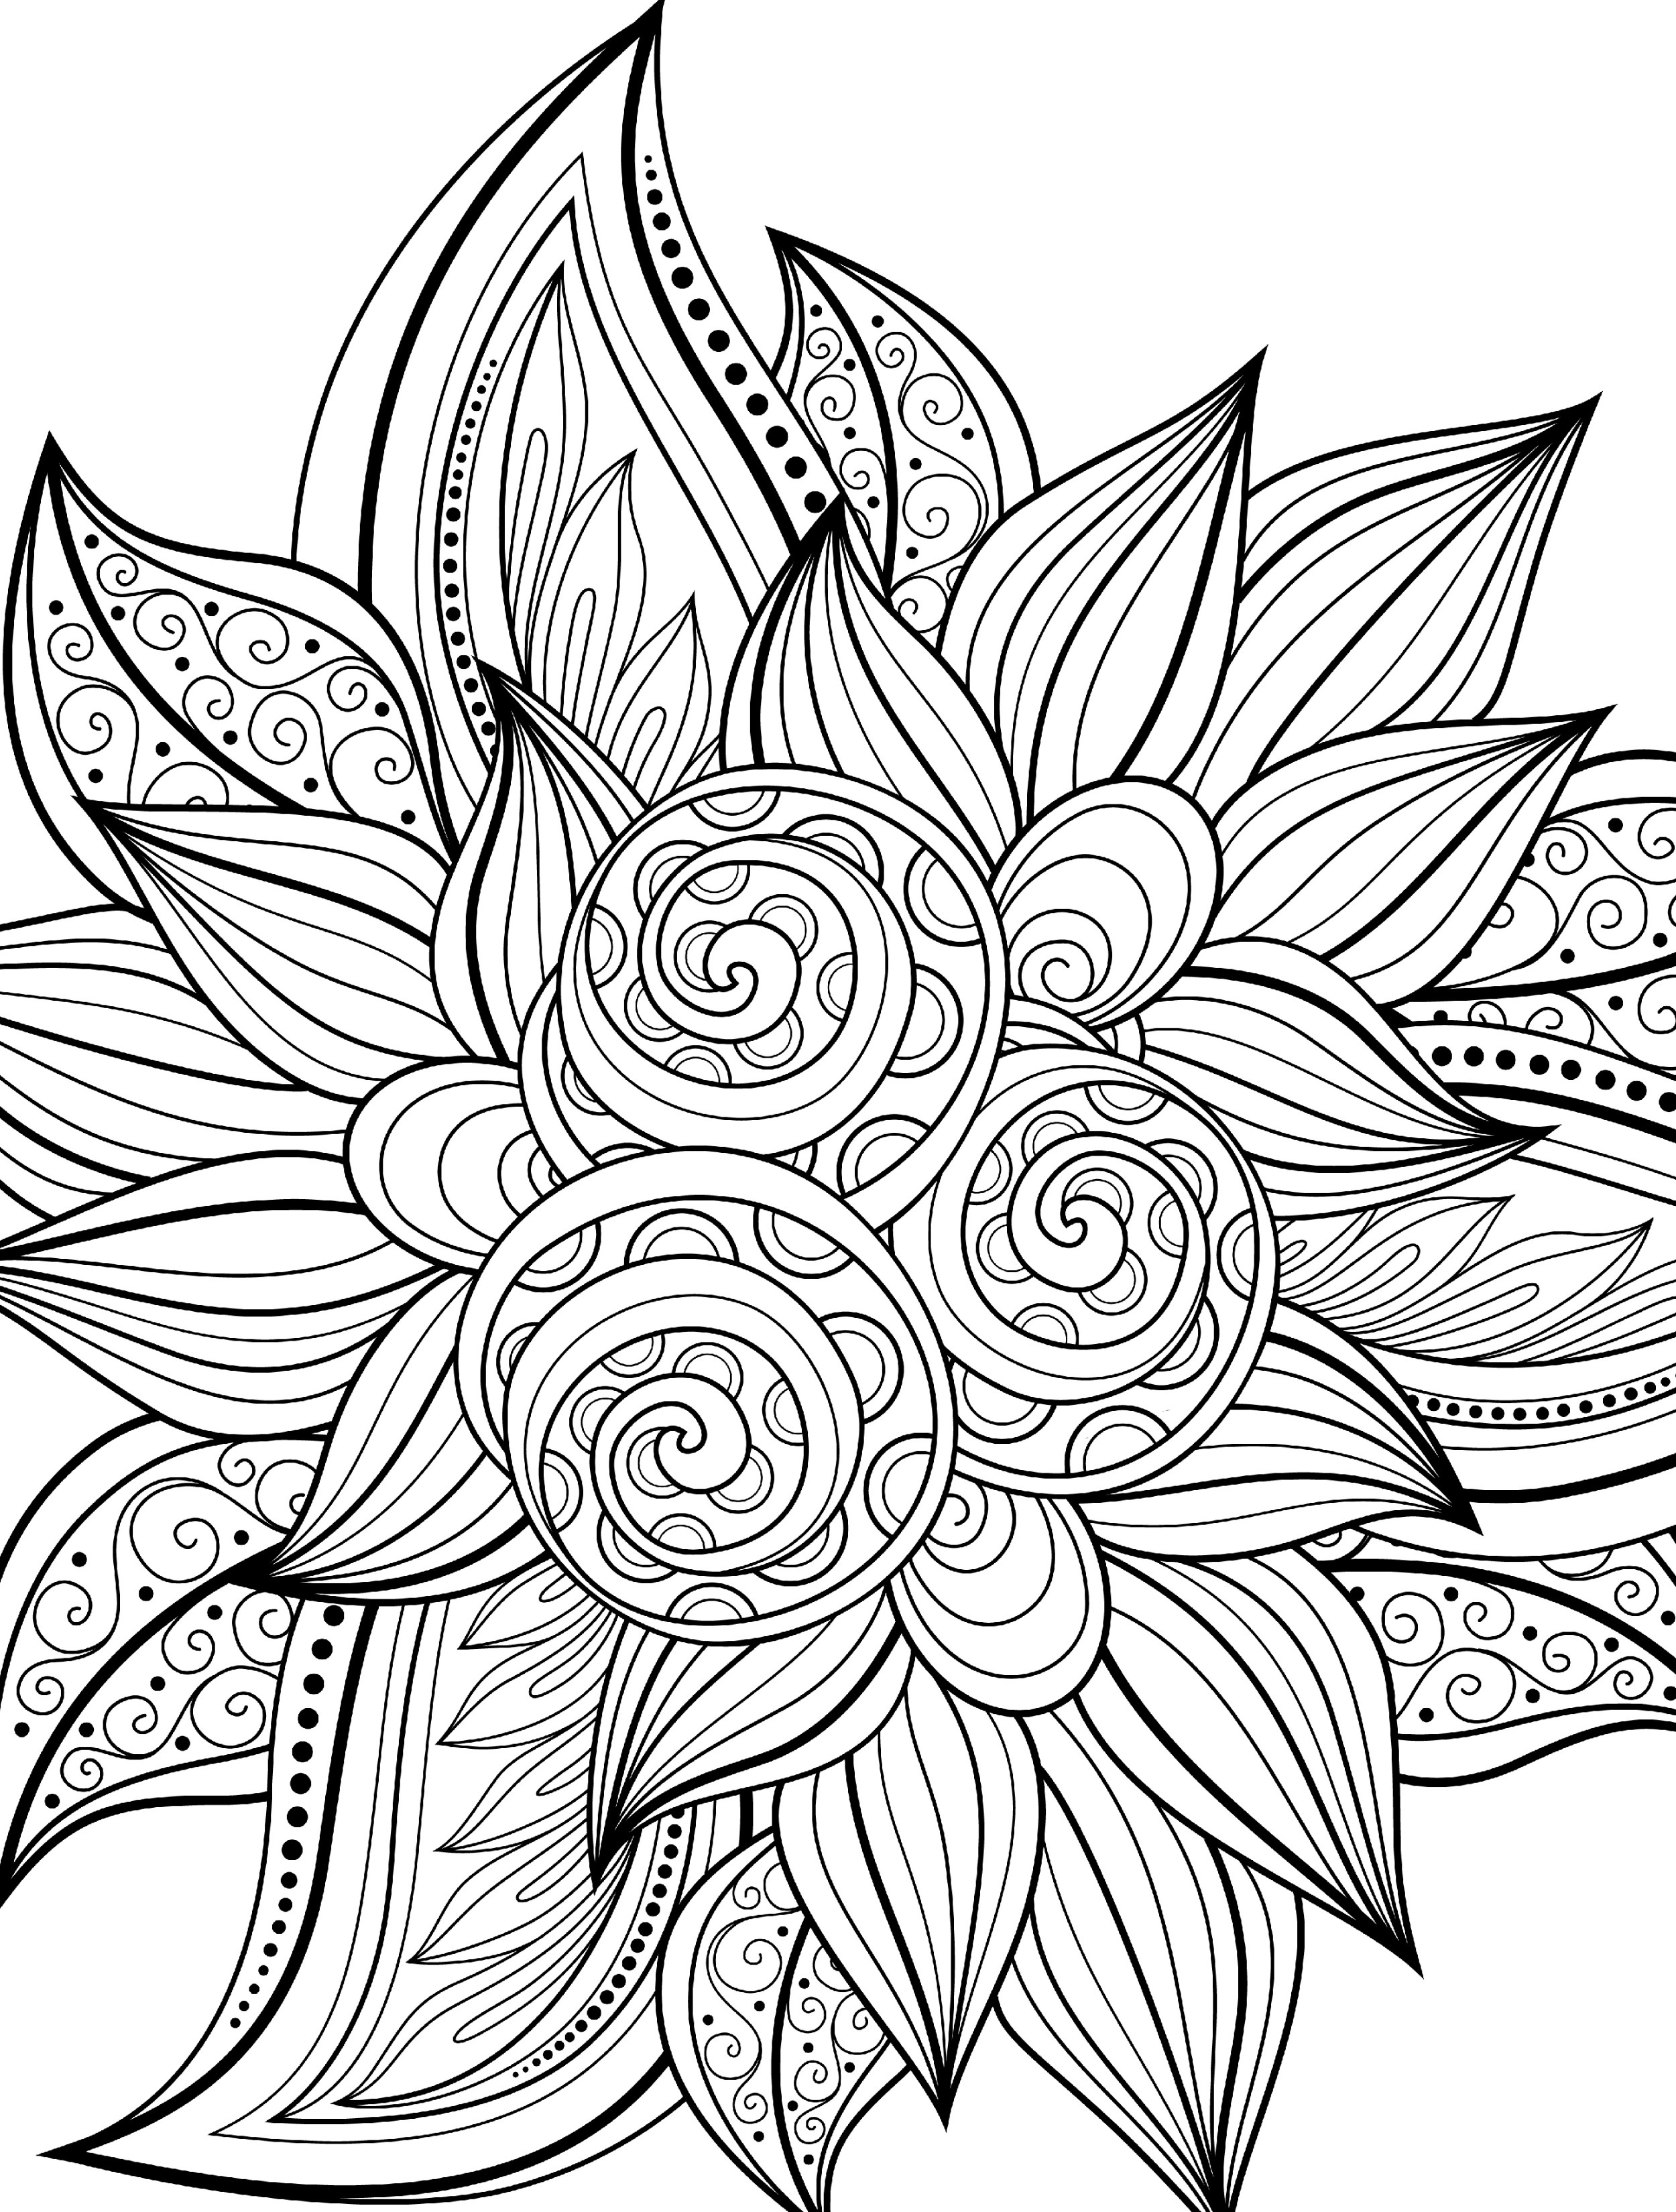 10 Free Printable Holiday Adult Coloring Pages - Free Coloring Pages Com Printable